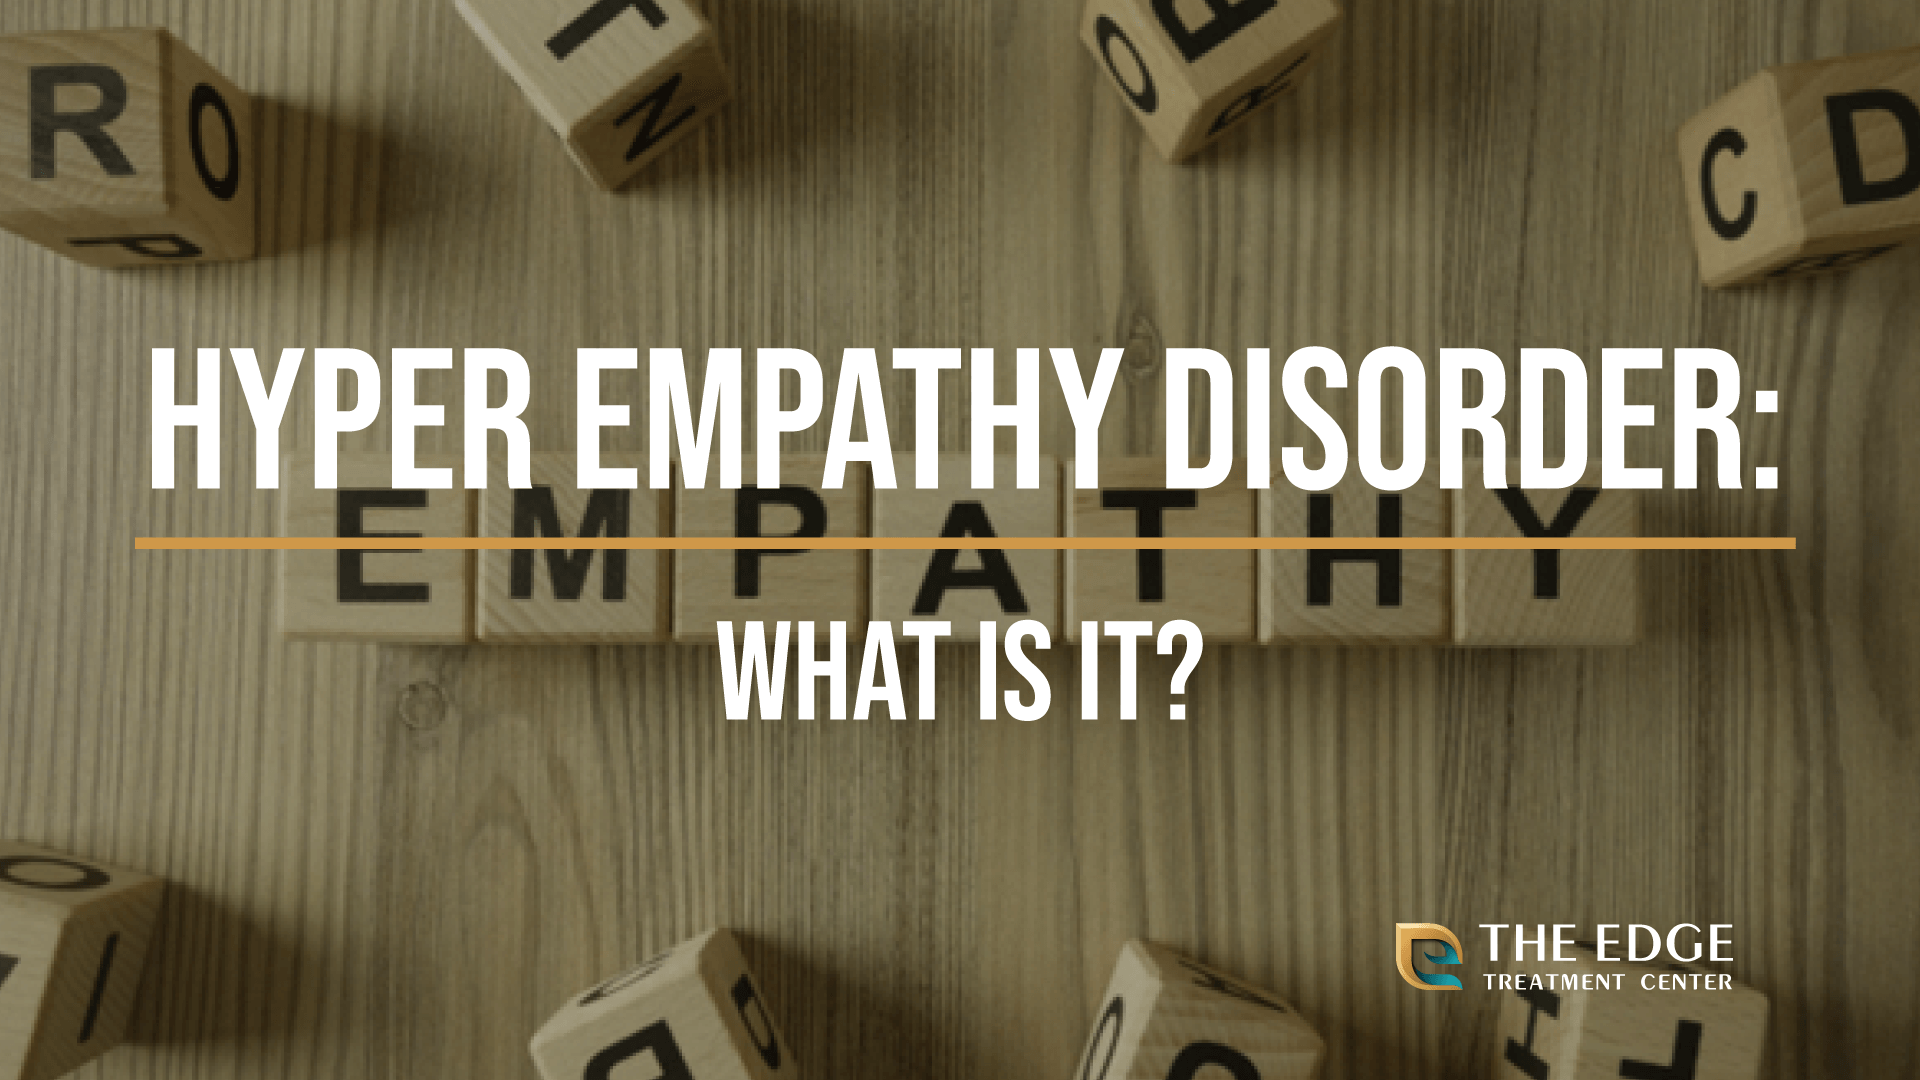 What is Hyper Empathy Disorder?